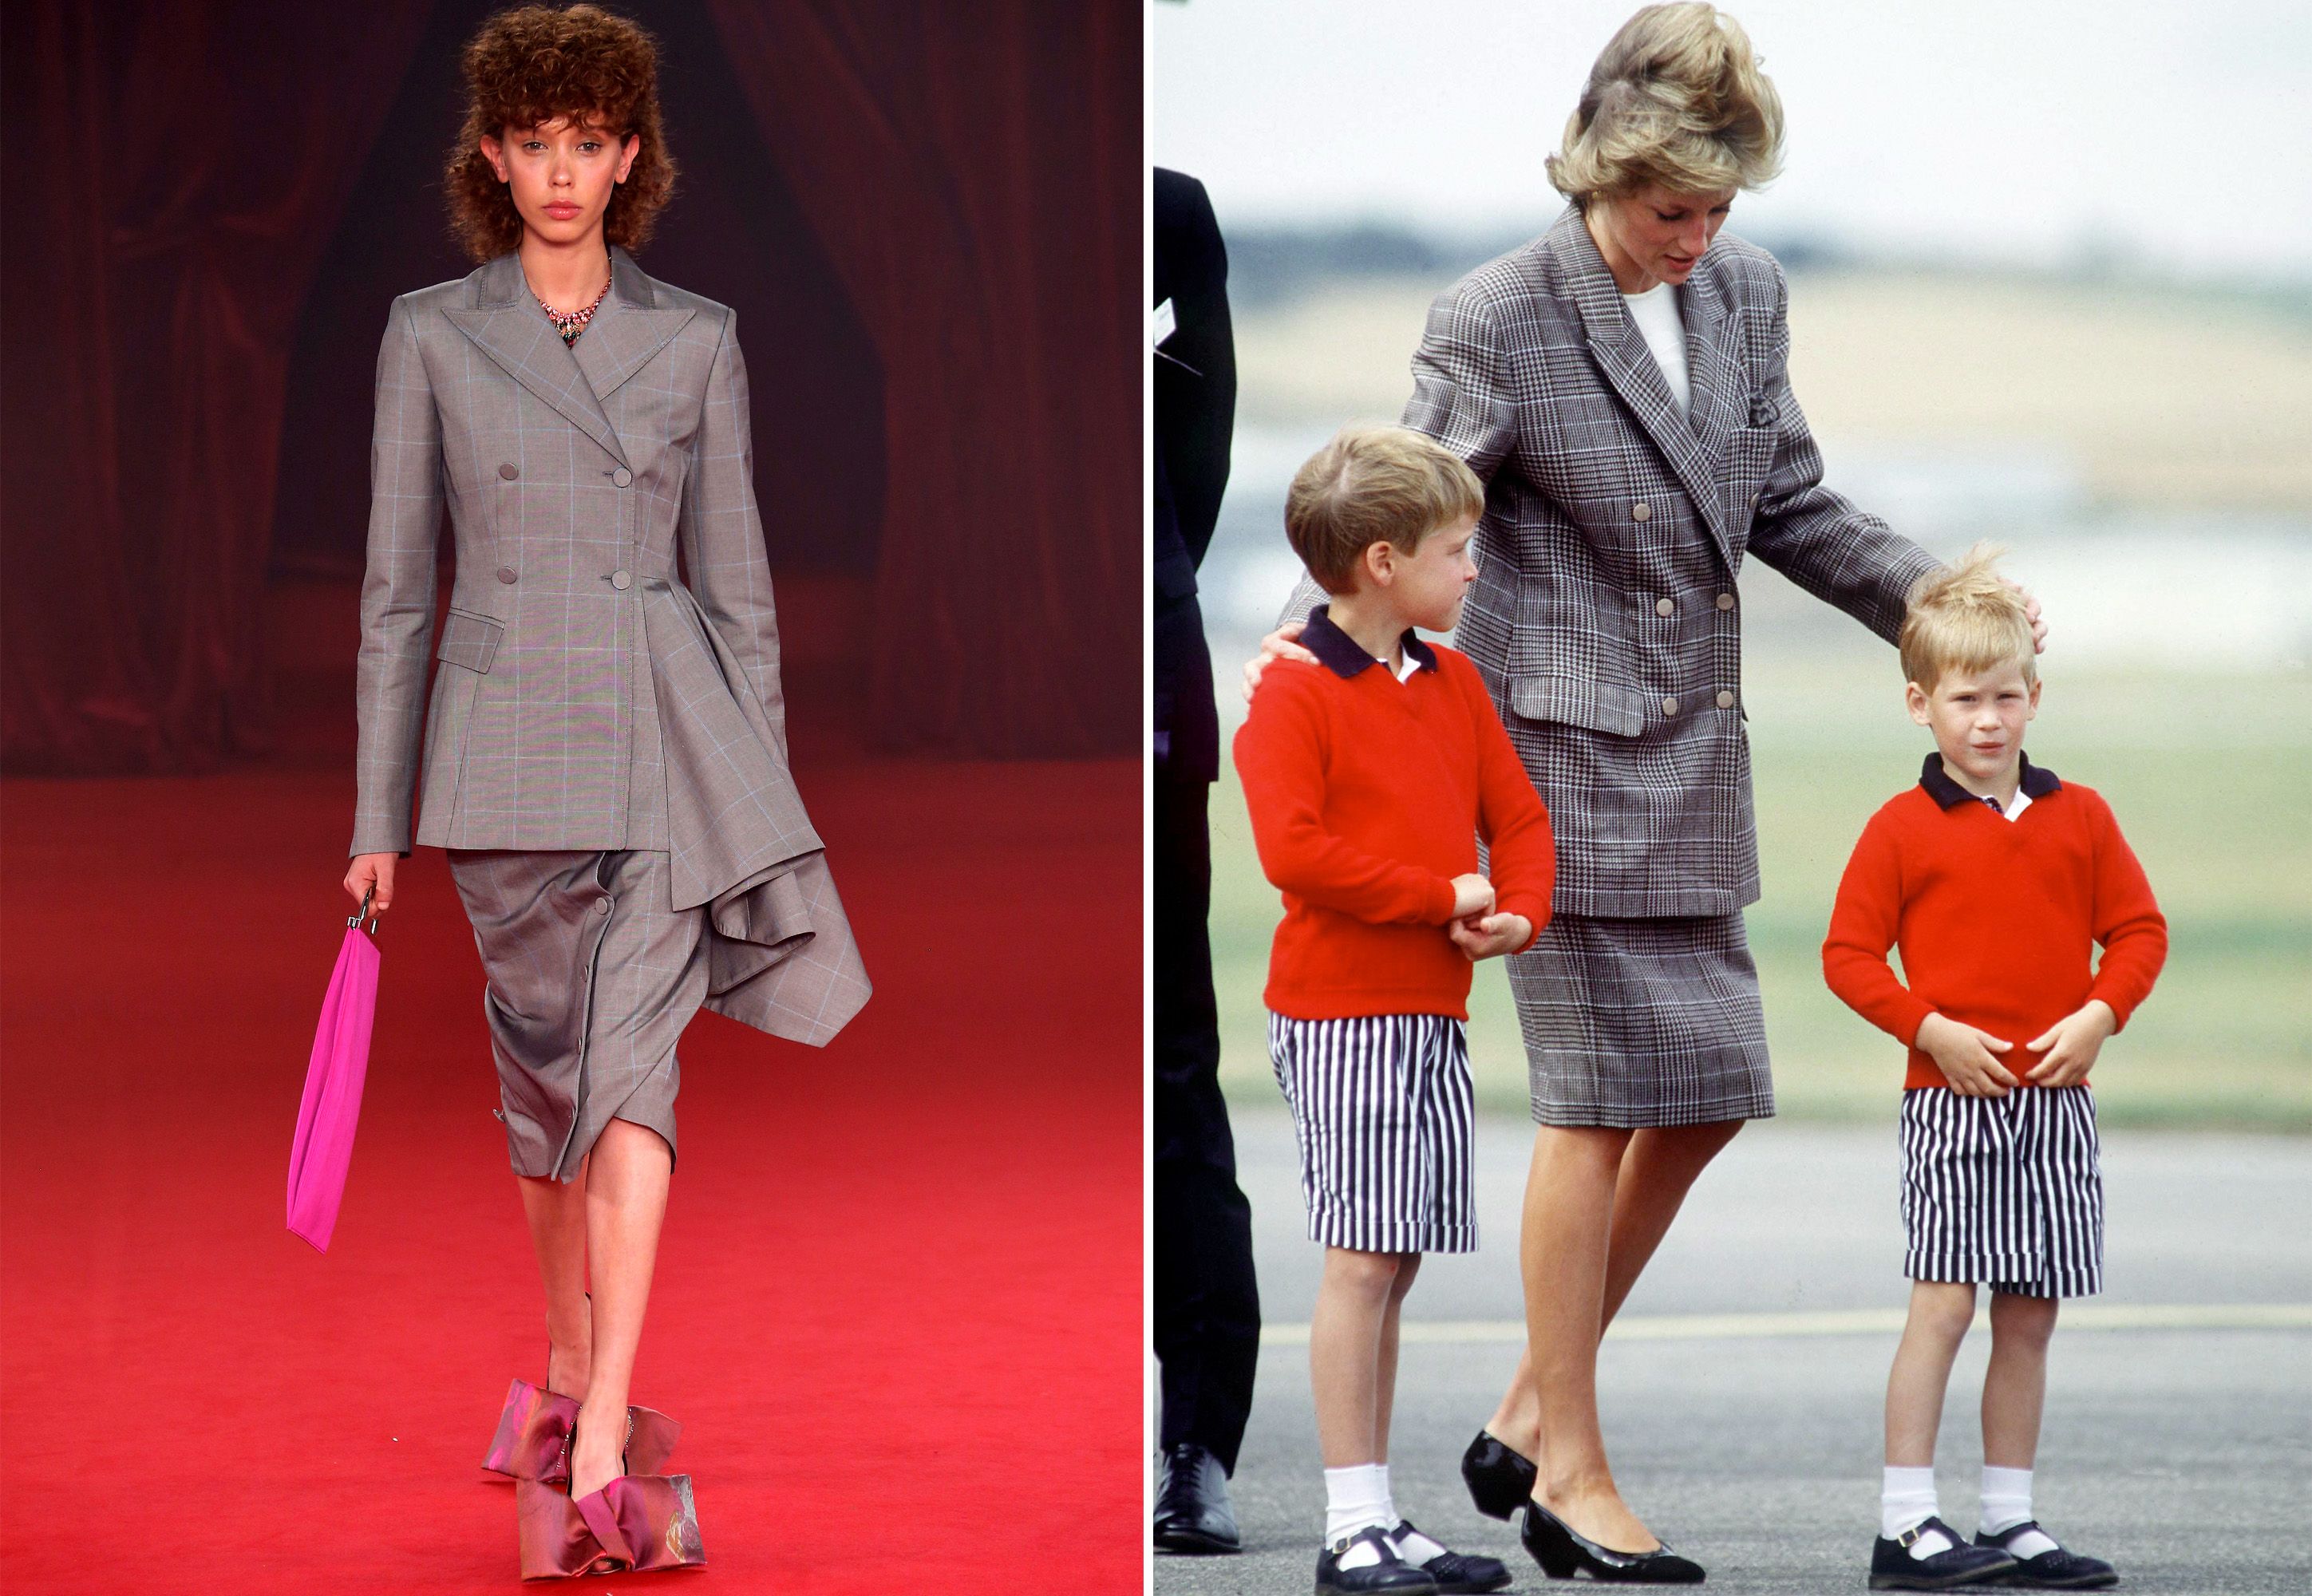 The Princess Diana Moments That Inspired Virgil Abloh's Latest Off